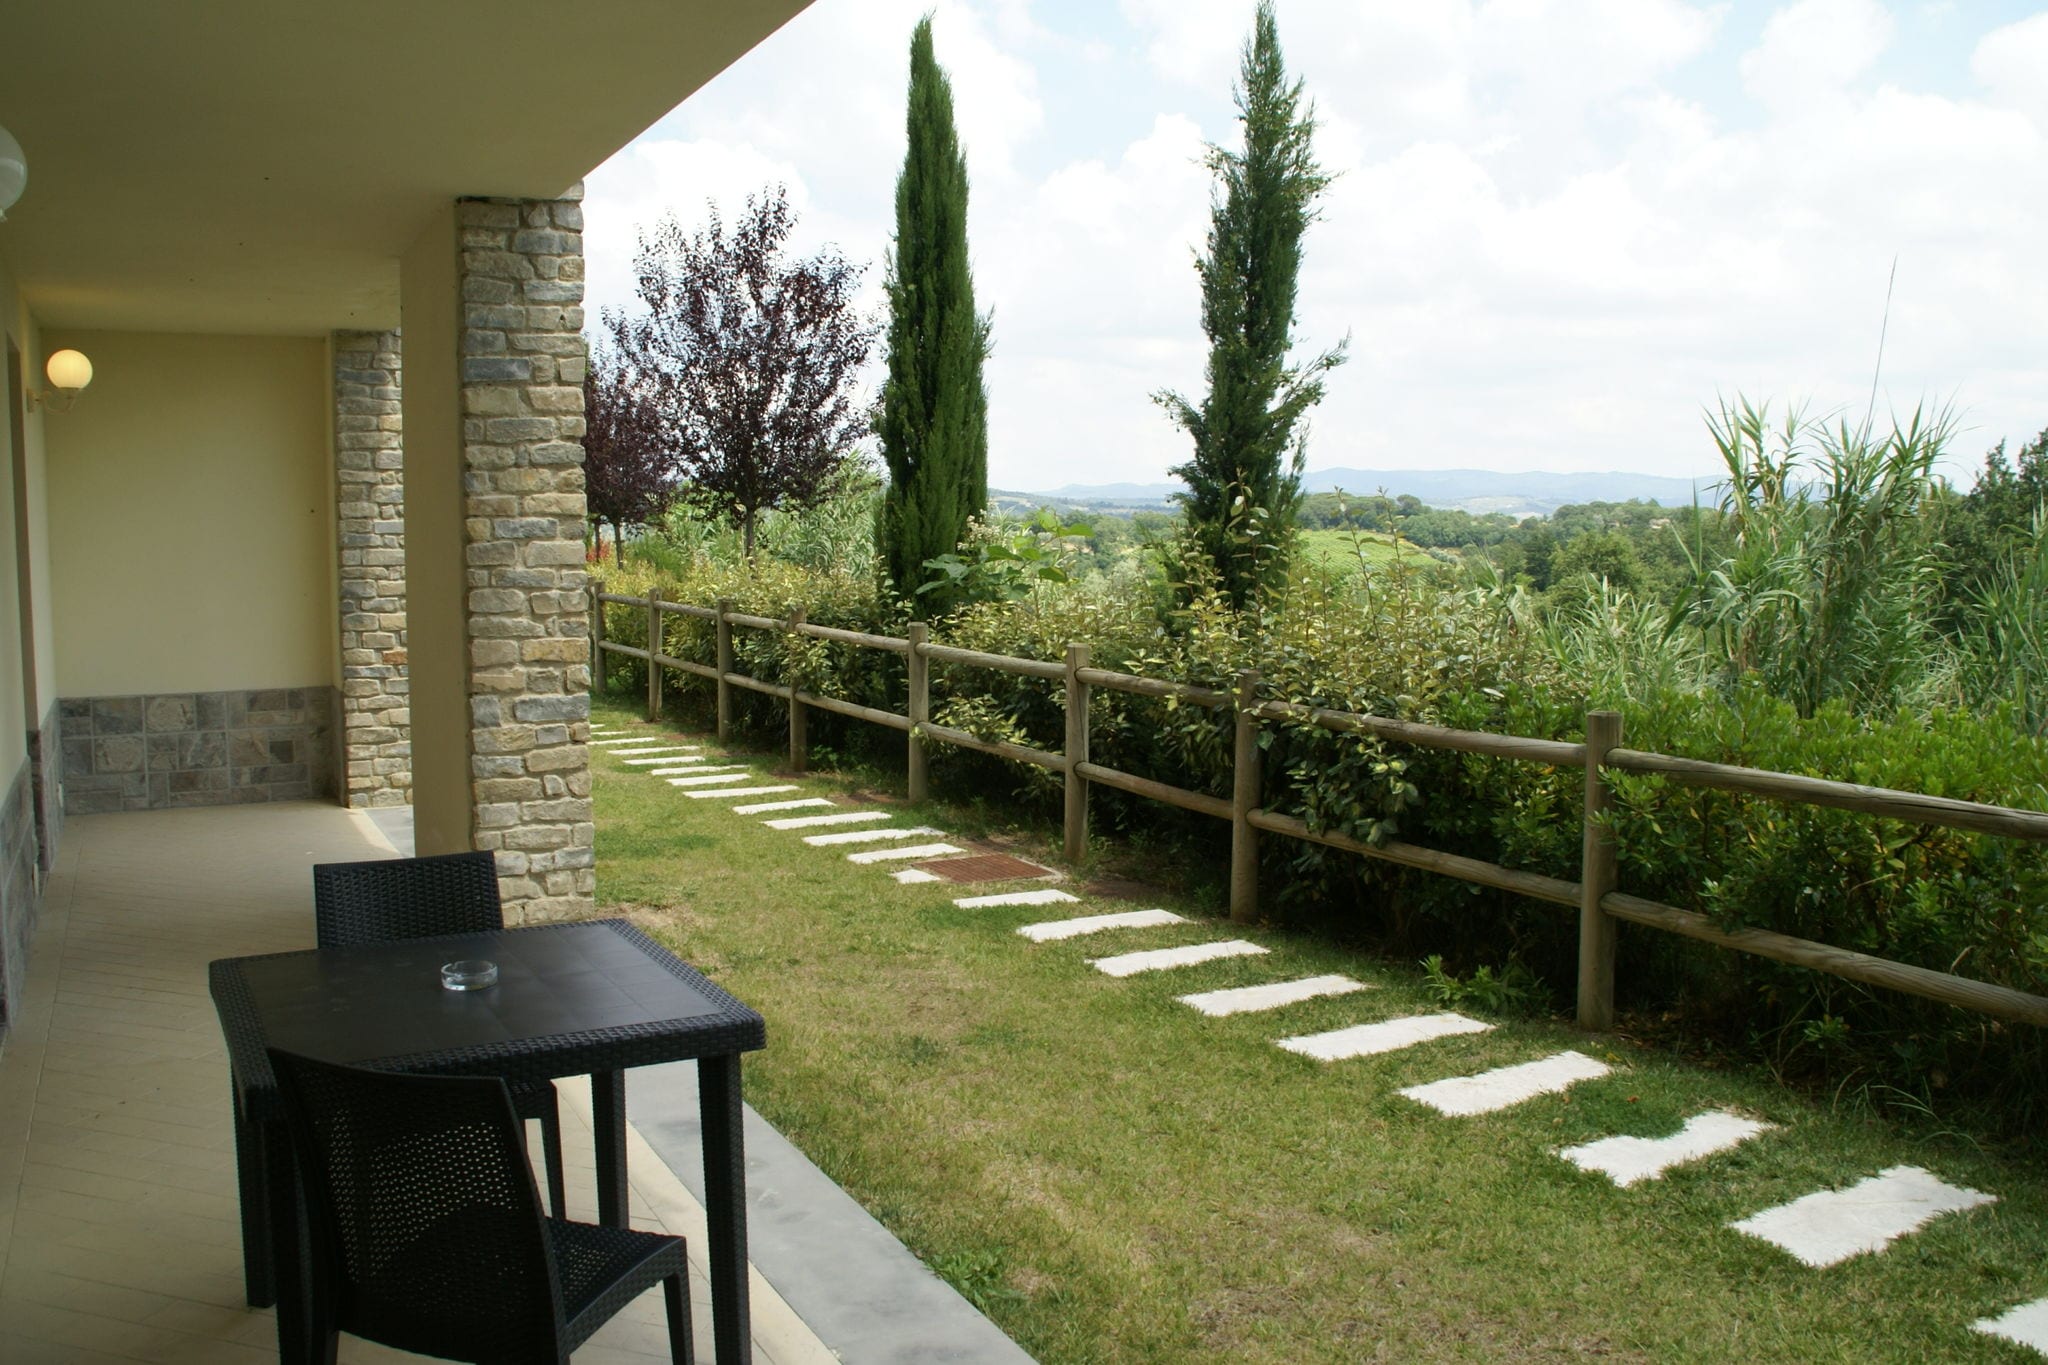 Modern furnished studio with air conditioning in Chianti